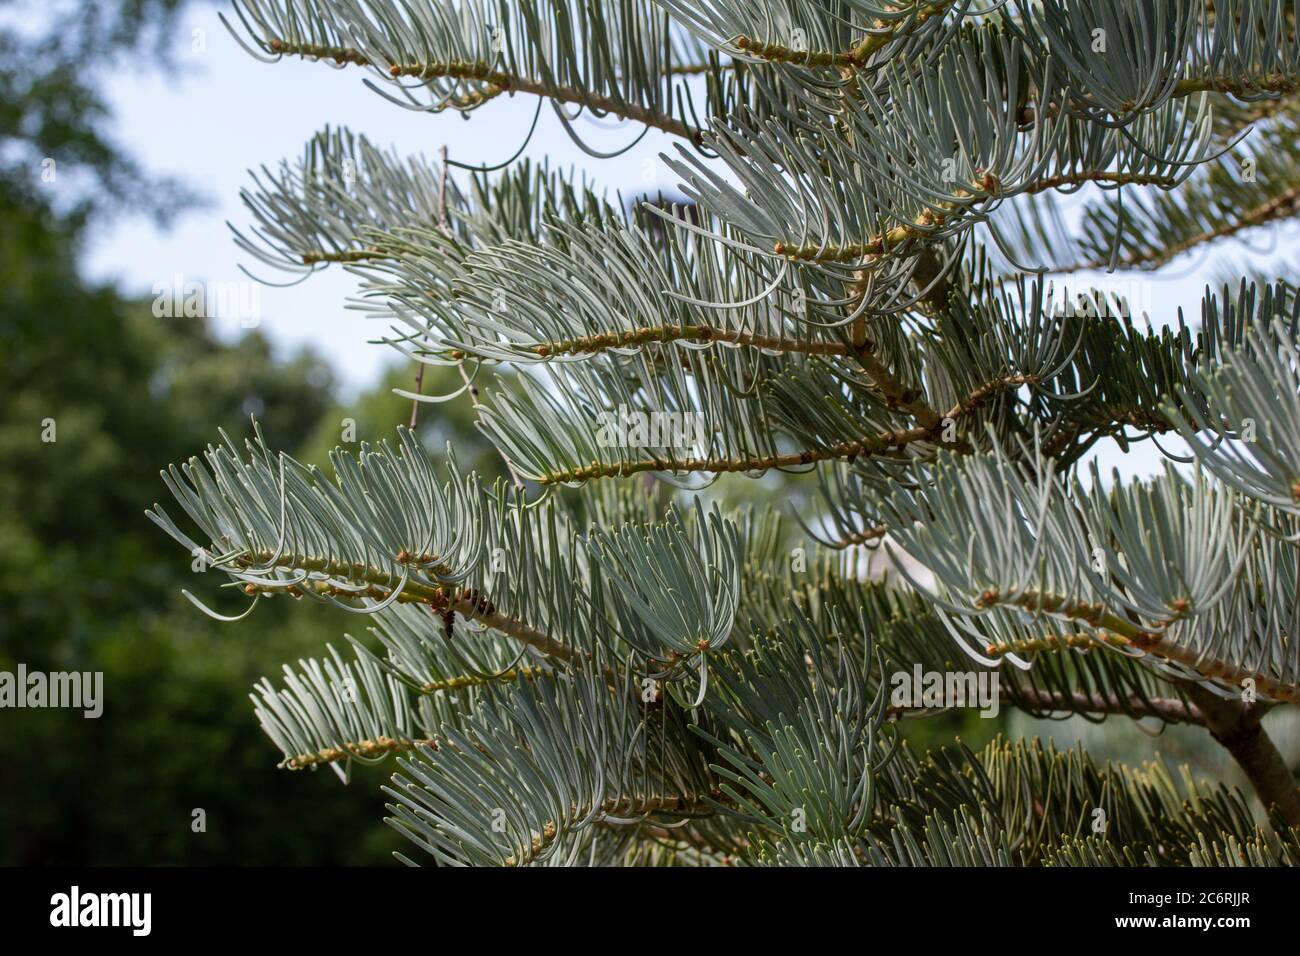 Close up abstract view of upright growing needles on a white fir tree in warm weather Stock Photo